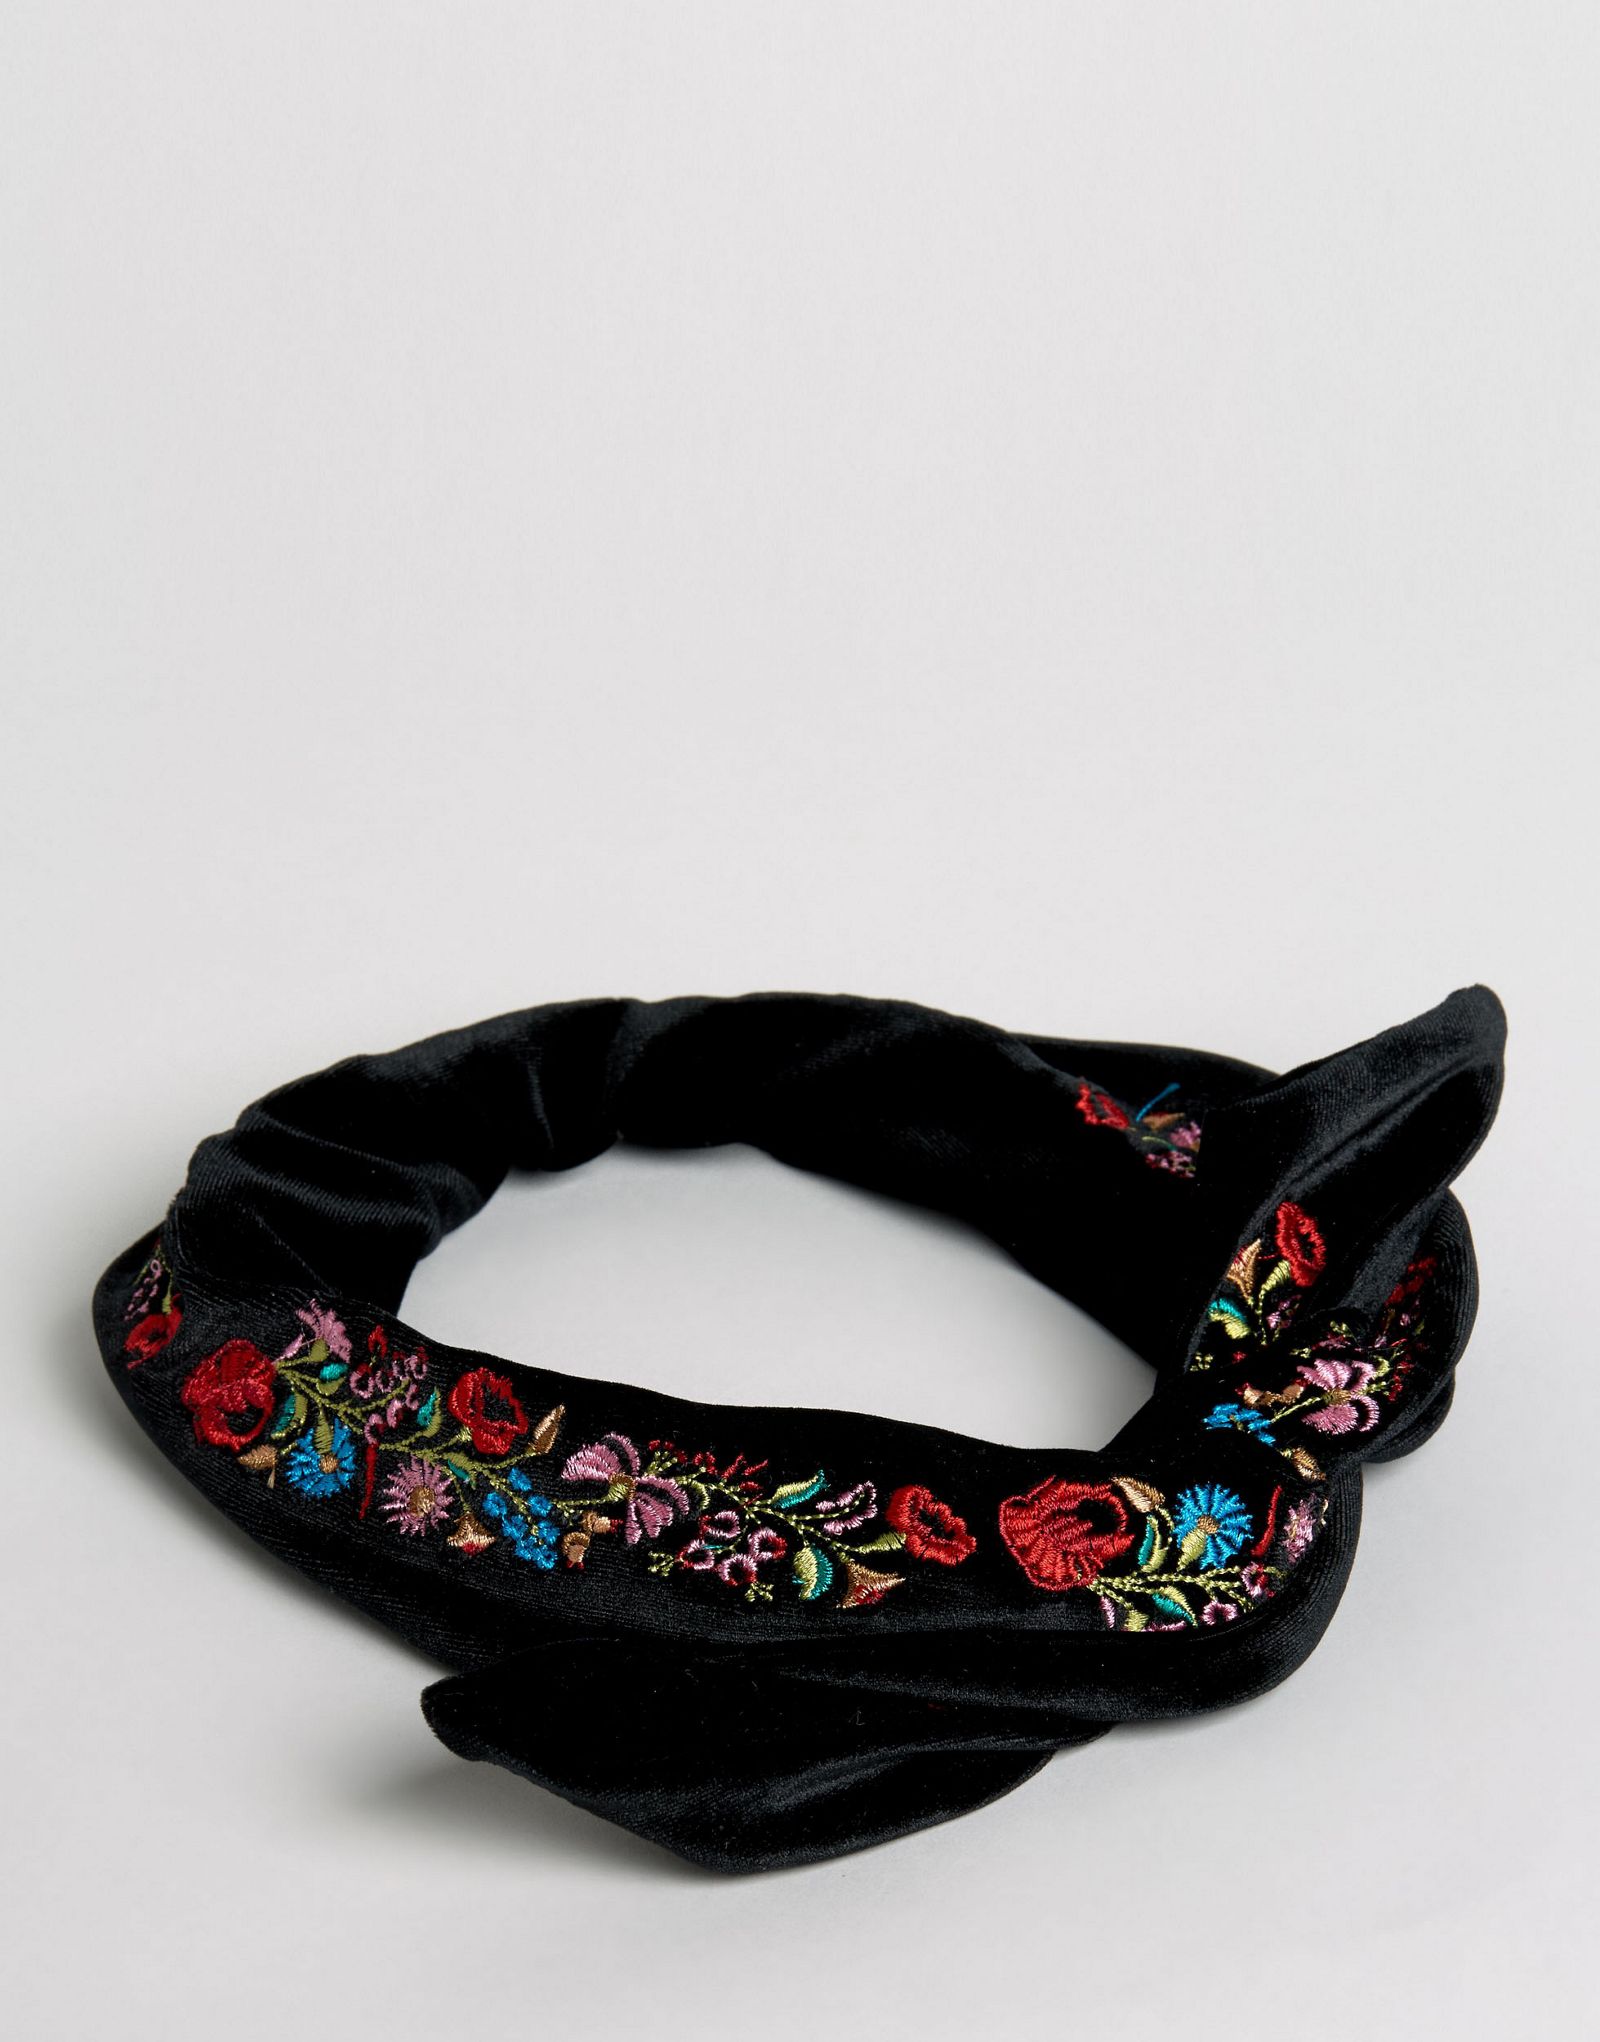 Her Curious Nature Embroidered Headband